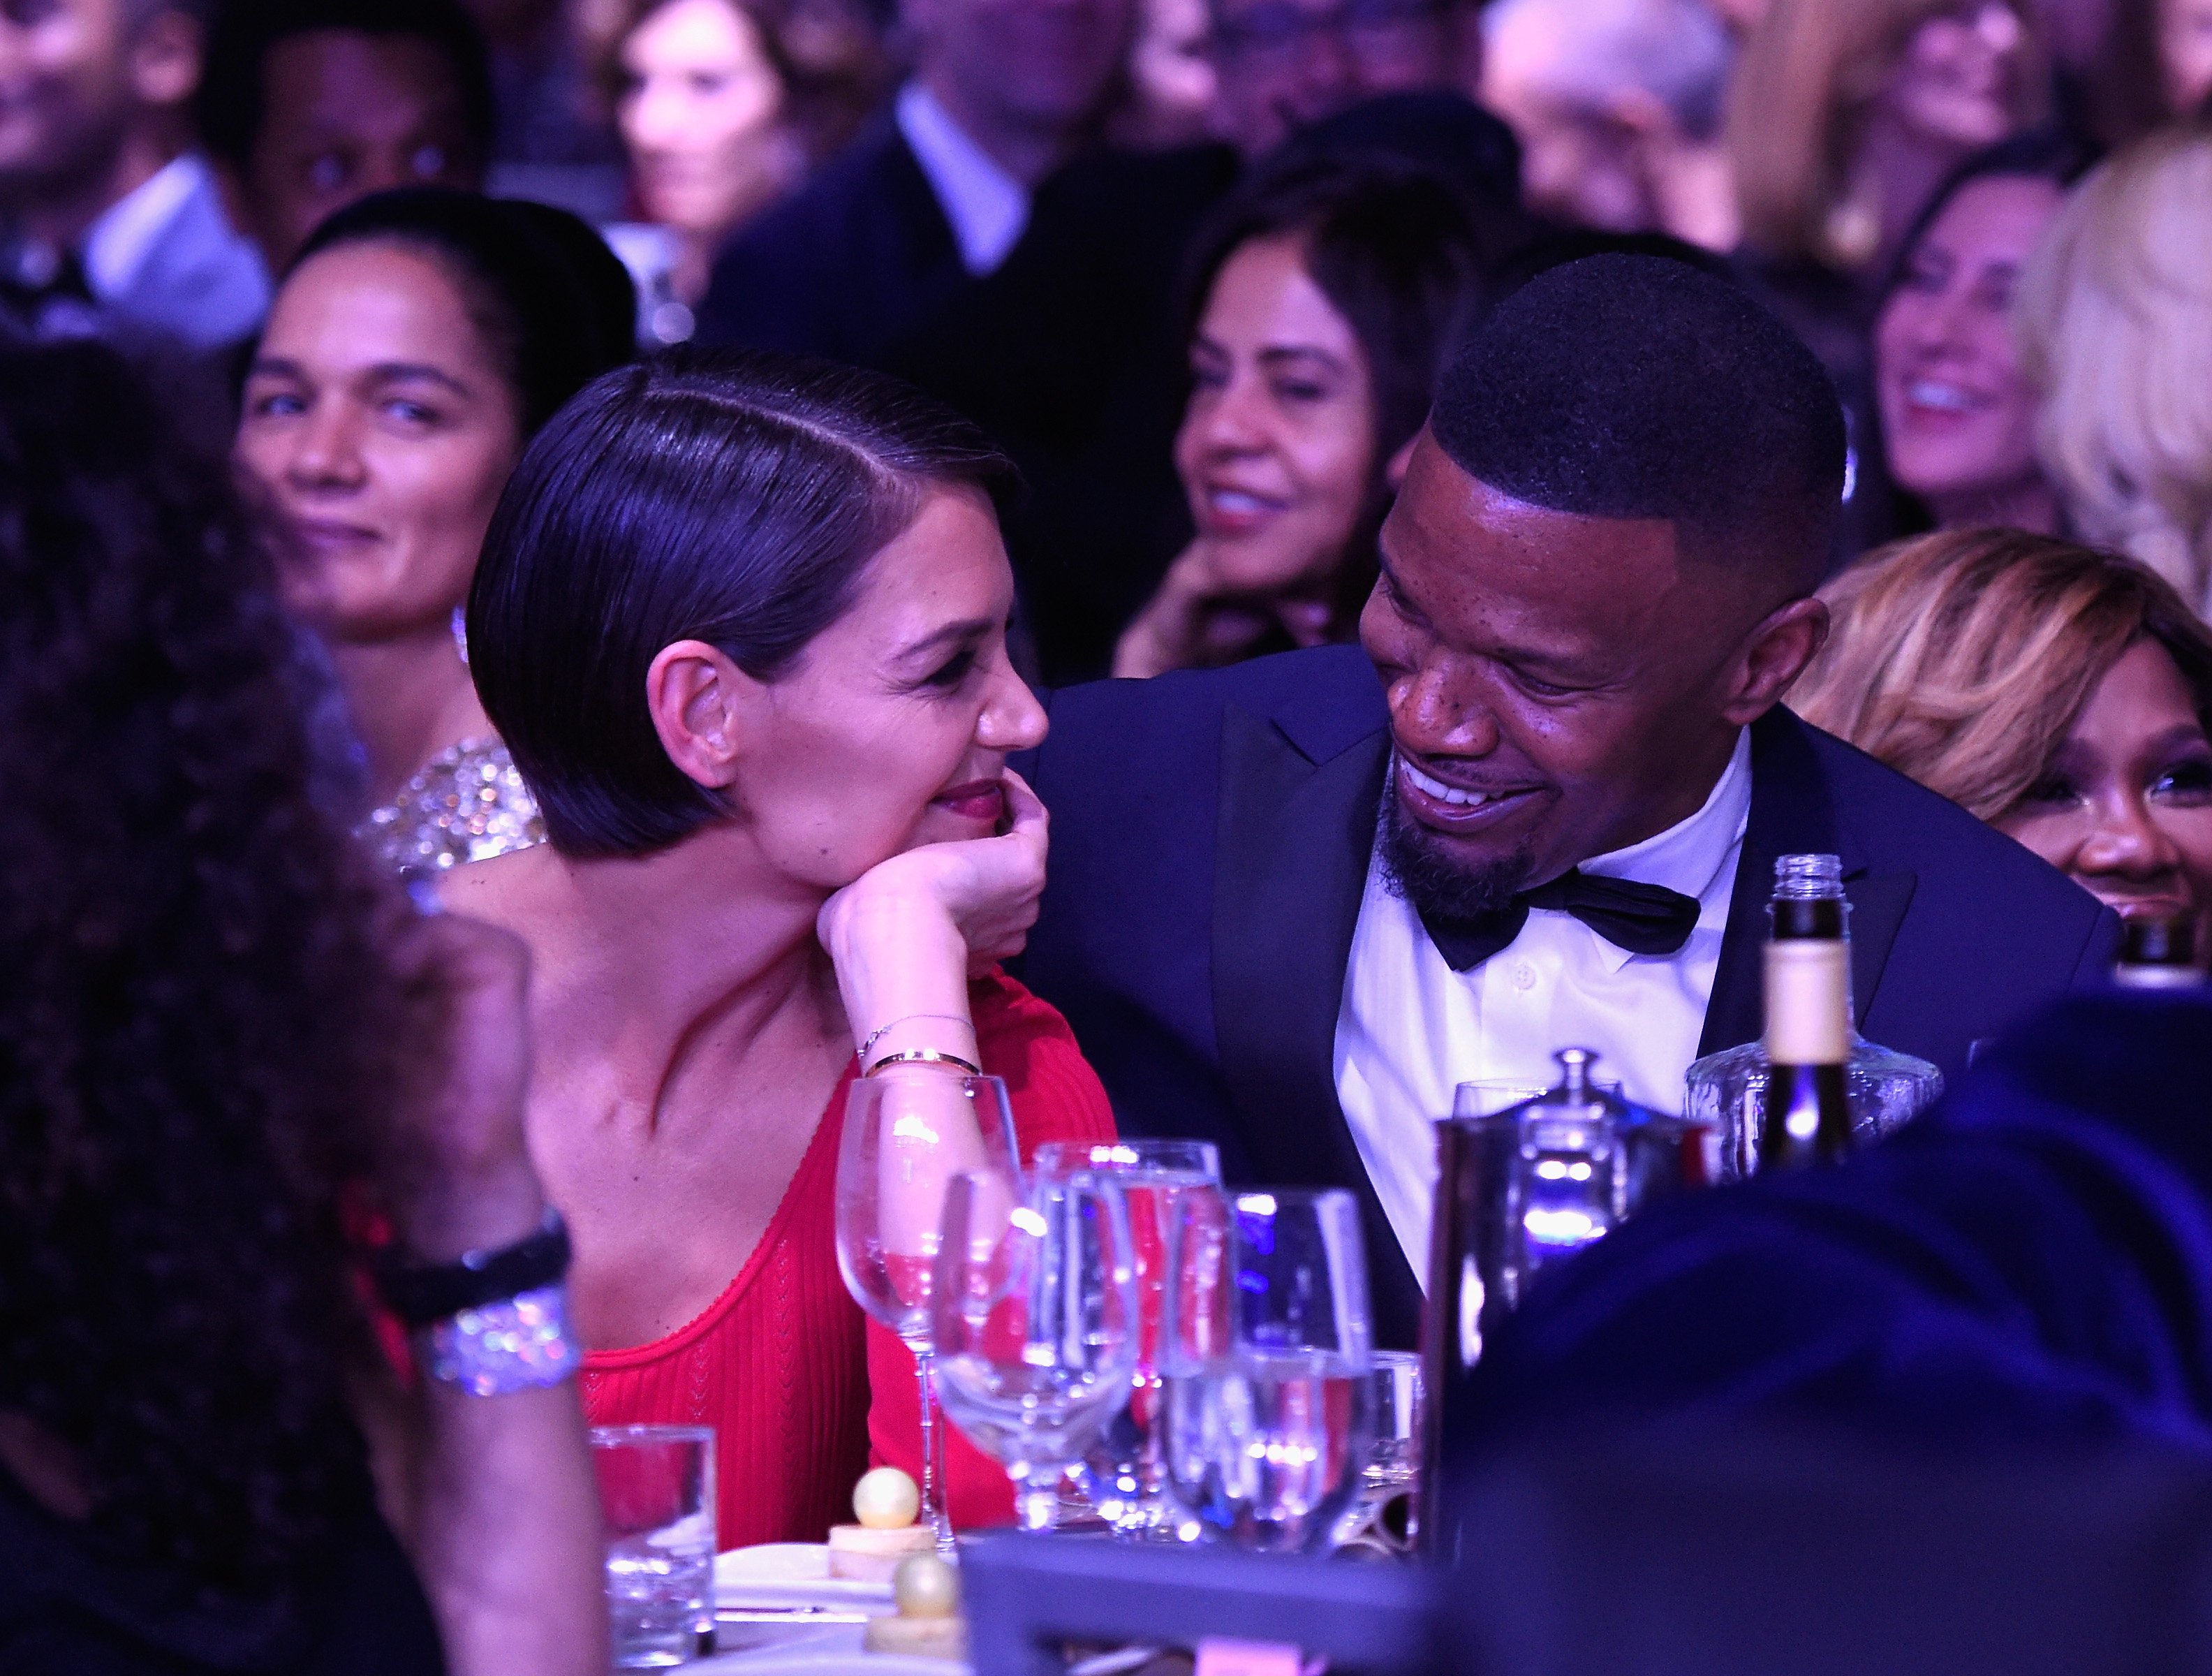 Katie Holmes and Jamie Foxx attend the Clive Davis and Recording Academy Pre-GRAMMY Gala and GRAMMY Salute to Industry Icons on January 27, 2018 in New York City. | Source: Getty Images